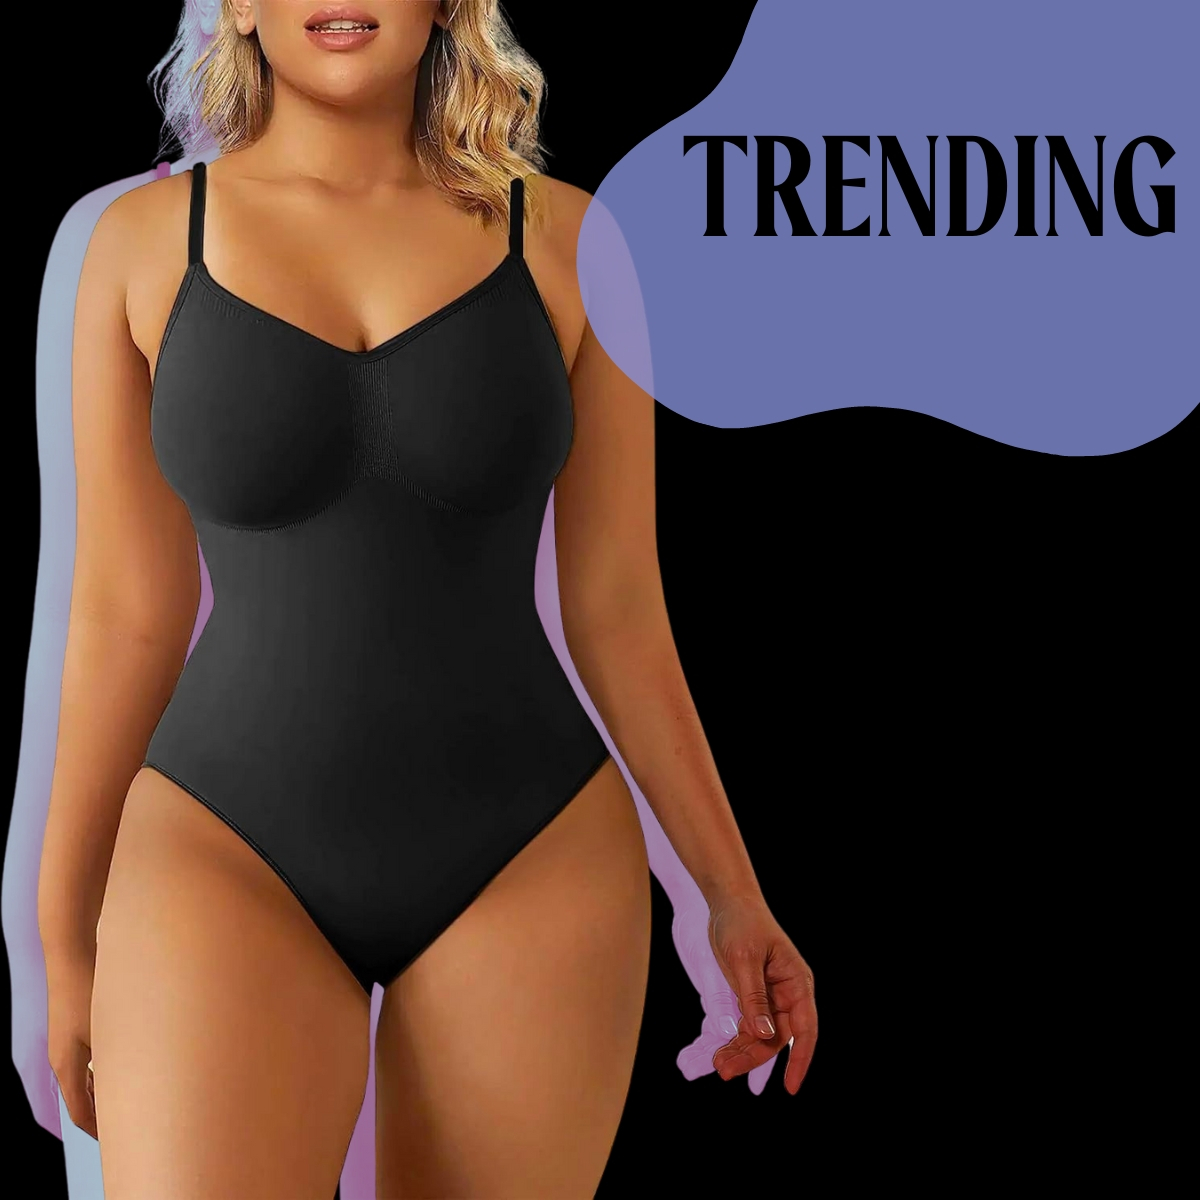 shaperx Bodysuit For Women. Tummy Control Brand New for Sale in